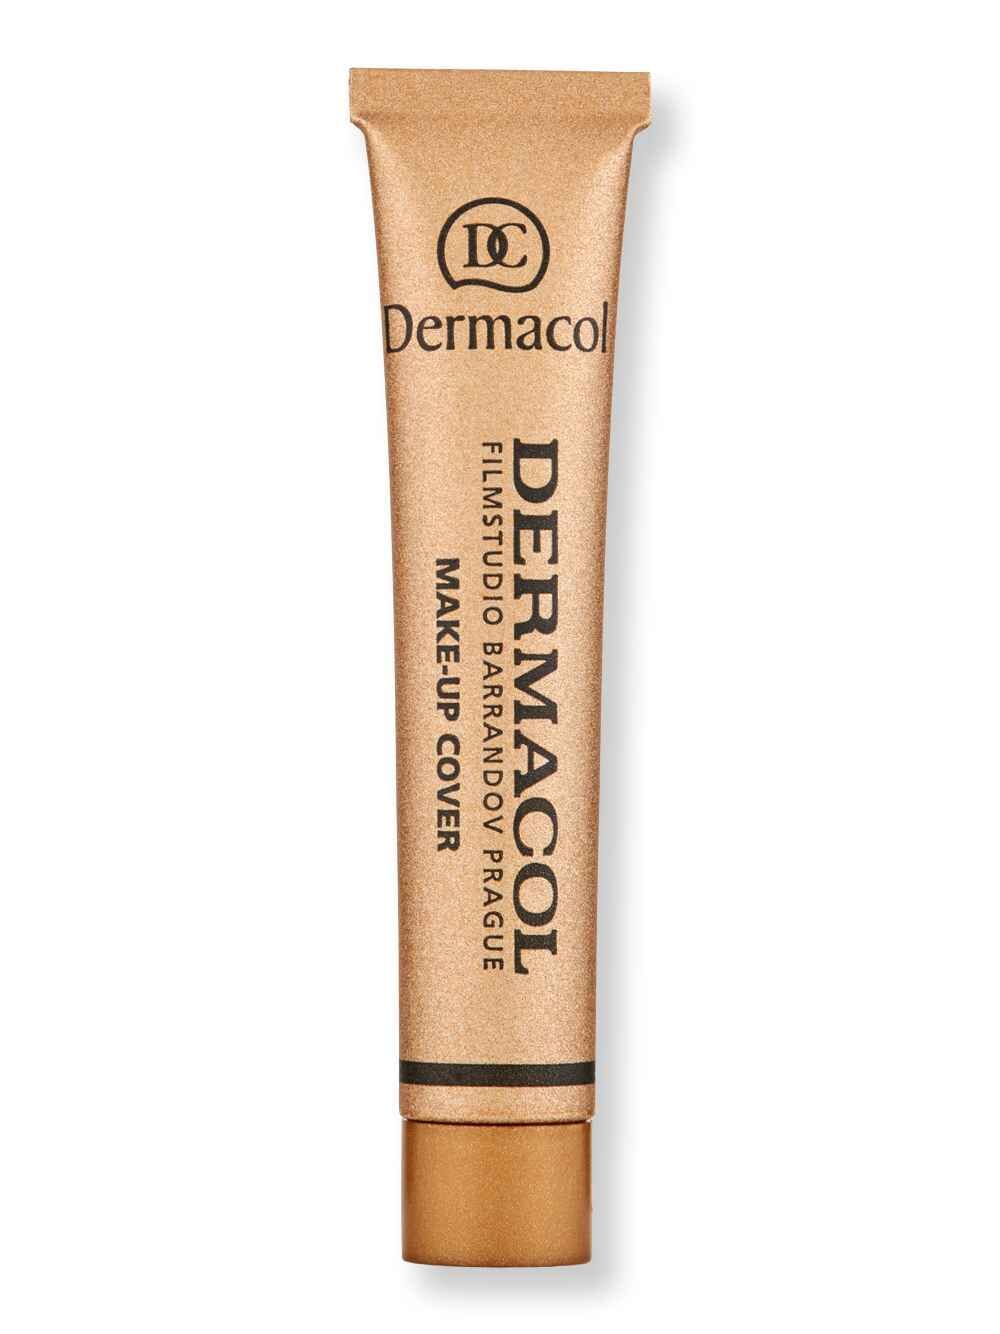 Dermacol Dermacol Make-up Cover 30 g228 Tinted Moisturizers & Foundations 